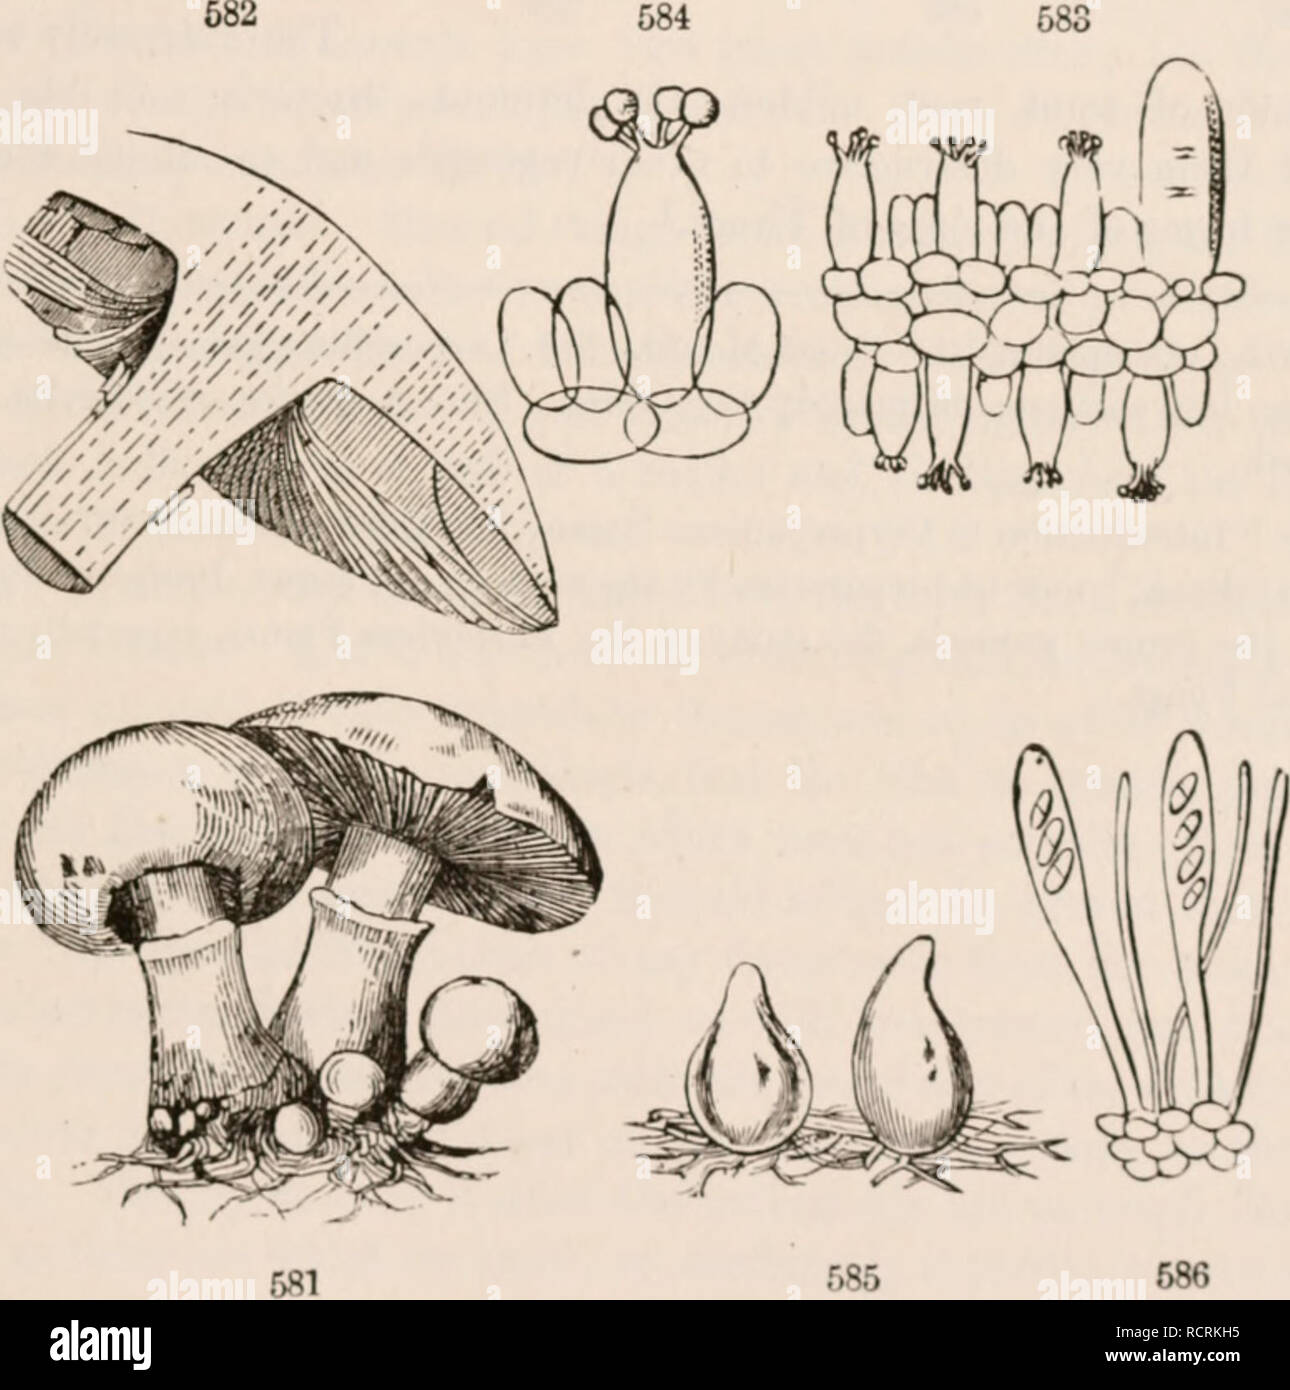 . The elements of botany for beginners and for schools. Plants. SECTION 17.] THALLOPHYTKS. 173 cells lengthen and branch, growing by the absorption through their whole surface of the decaying, or organizable, or living matter which they reed upon. In a Mushroom (Agaricus), a knobby mass is at length formed, which develops into a stout stalk {Stipe)y bearing the cap i I'ilrus) : the under side of the cap is covered by the tfymenium, in this genus consisting of radiating plates, the gills or Lamella; and these hear the powdery spores ill immense numbers. Under the microscope, the gills are found Stock Photo